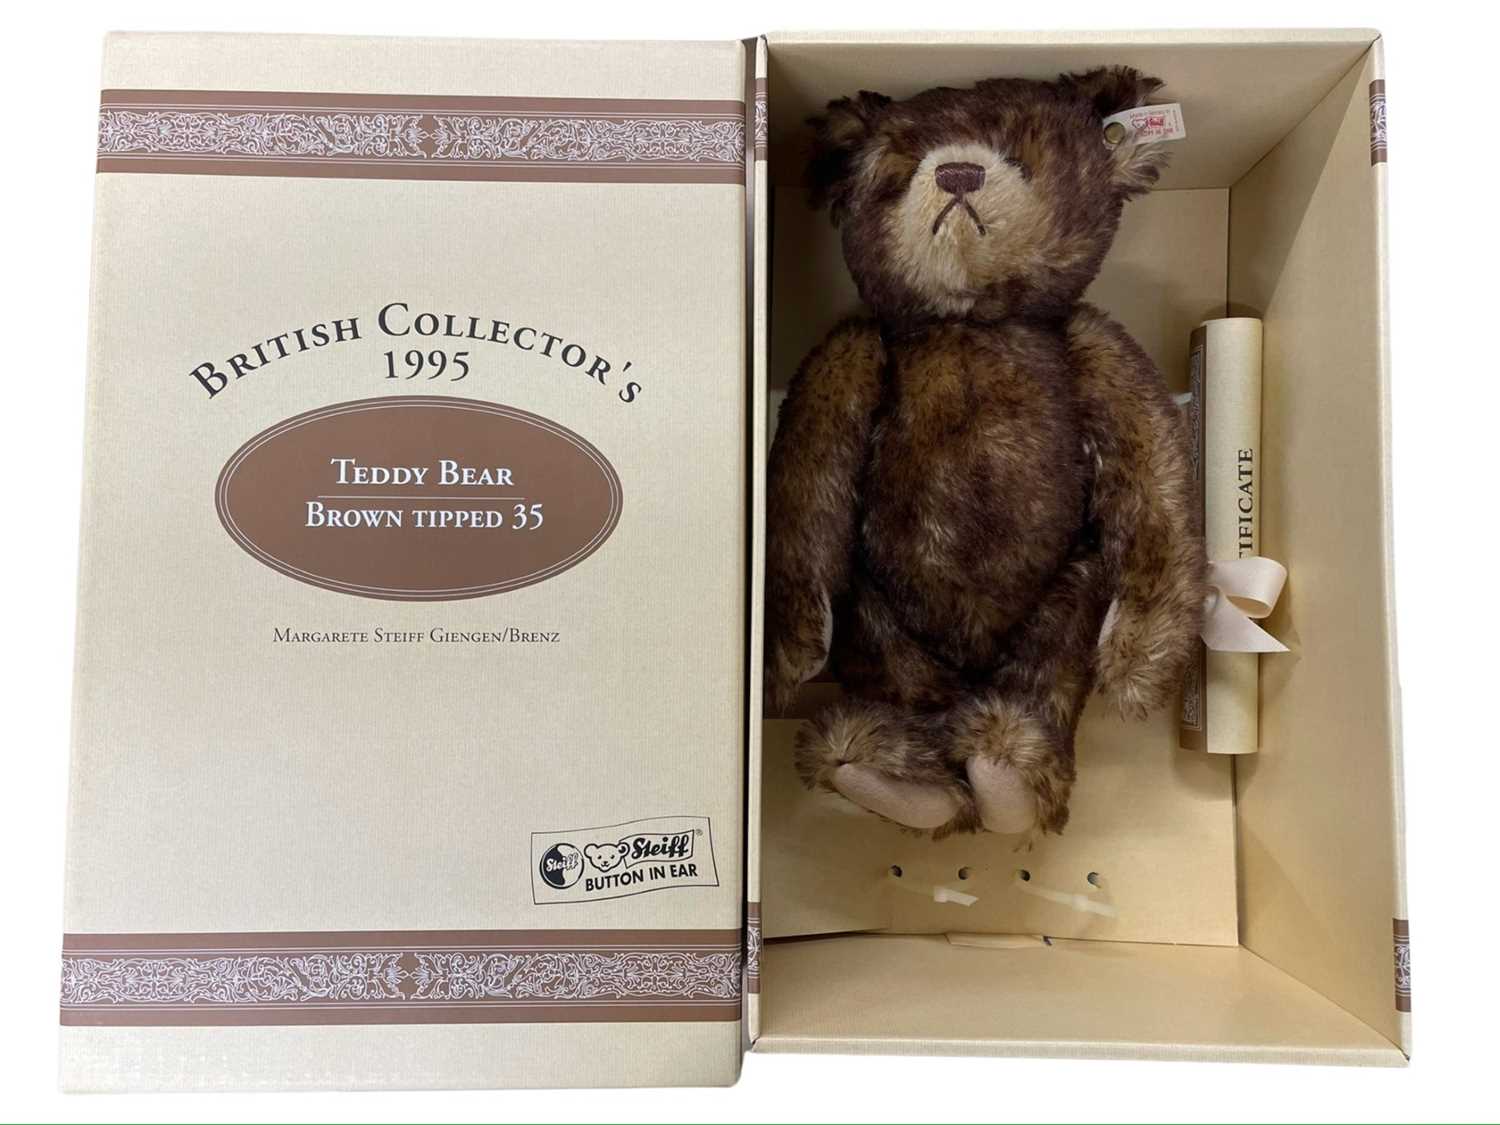 A boxed limited edition Steiff British Collector's 1995 Brown Tipped 35 Teddy Bear, with